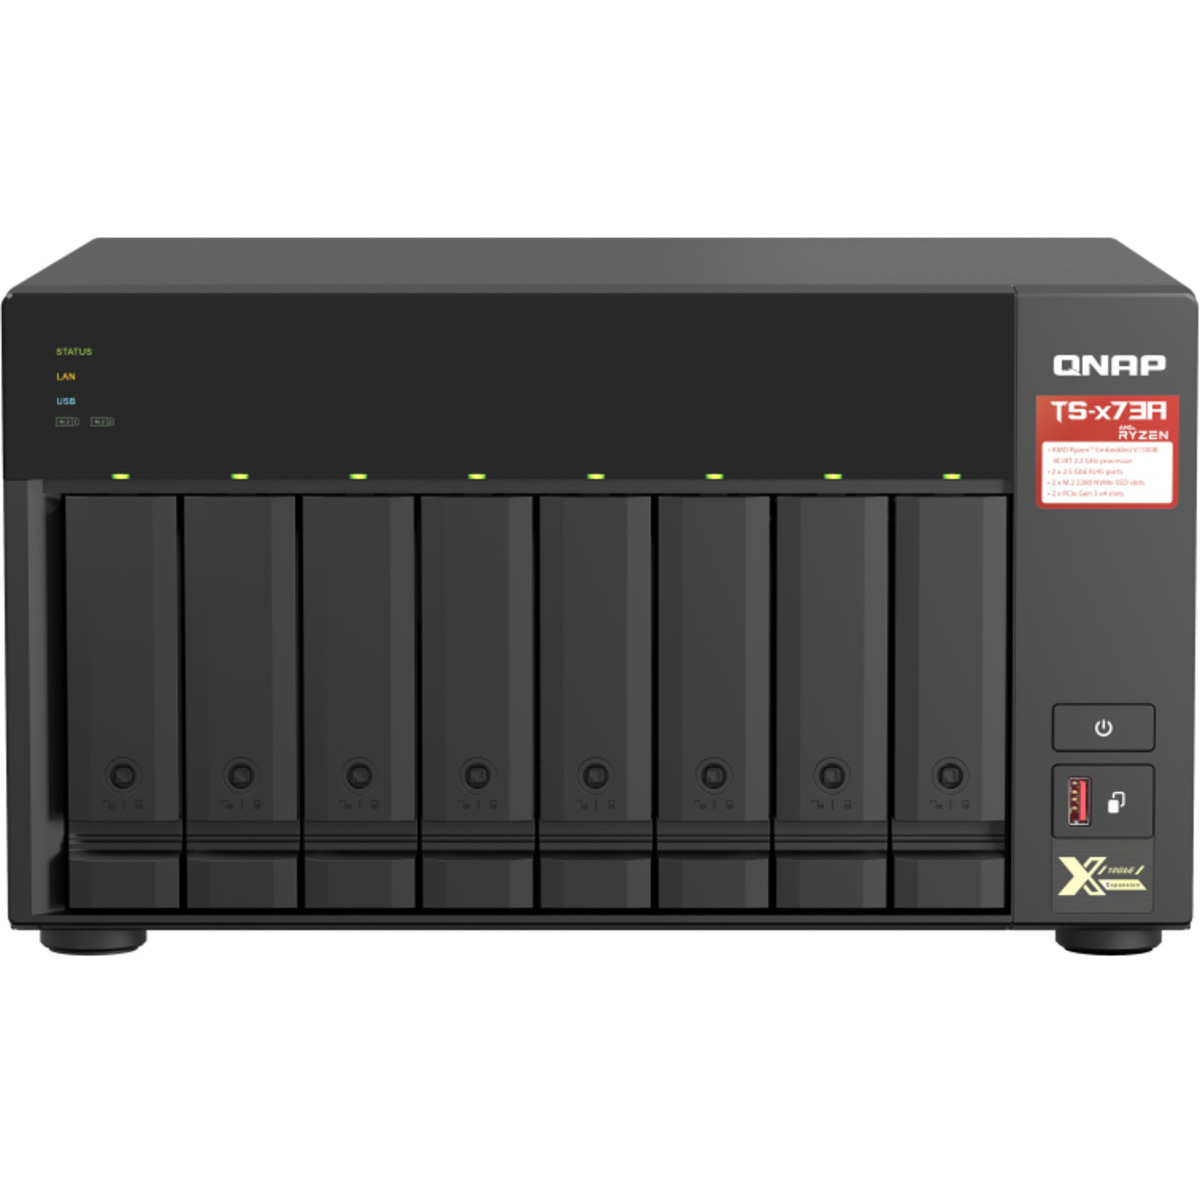 buy $8713 QNAP TS-873A 64tb Desktop NAS - Network Attached Storage Device 8x8000gb Samsung 870 QVO MZ-77Q8T0 2.5 SATA 6Gb/s SSD CONSUMER Class Drives Installed - Burn-In Tested - nas headquarters buy network attached storage server device das new raid-5 free shipping usa christmas new year holiday sale TS-873A